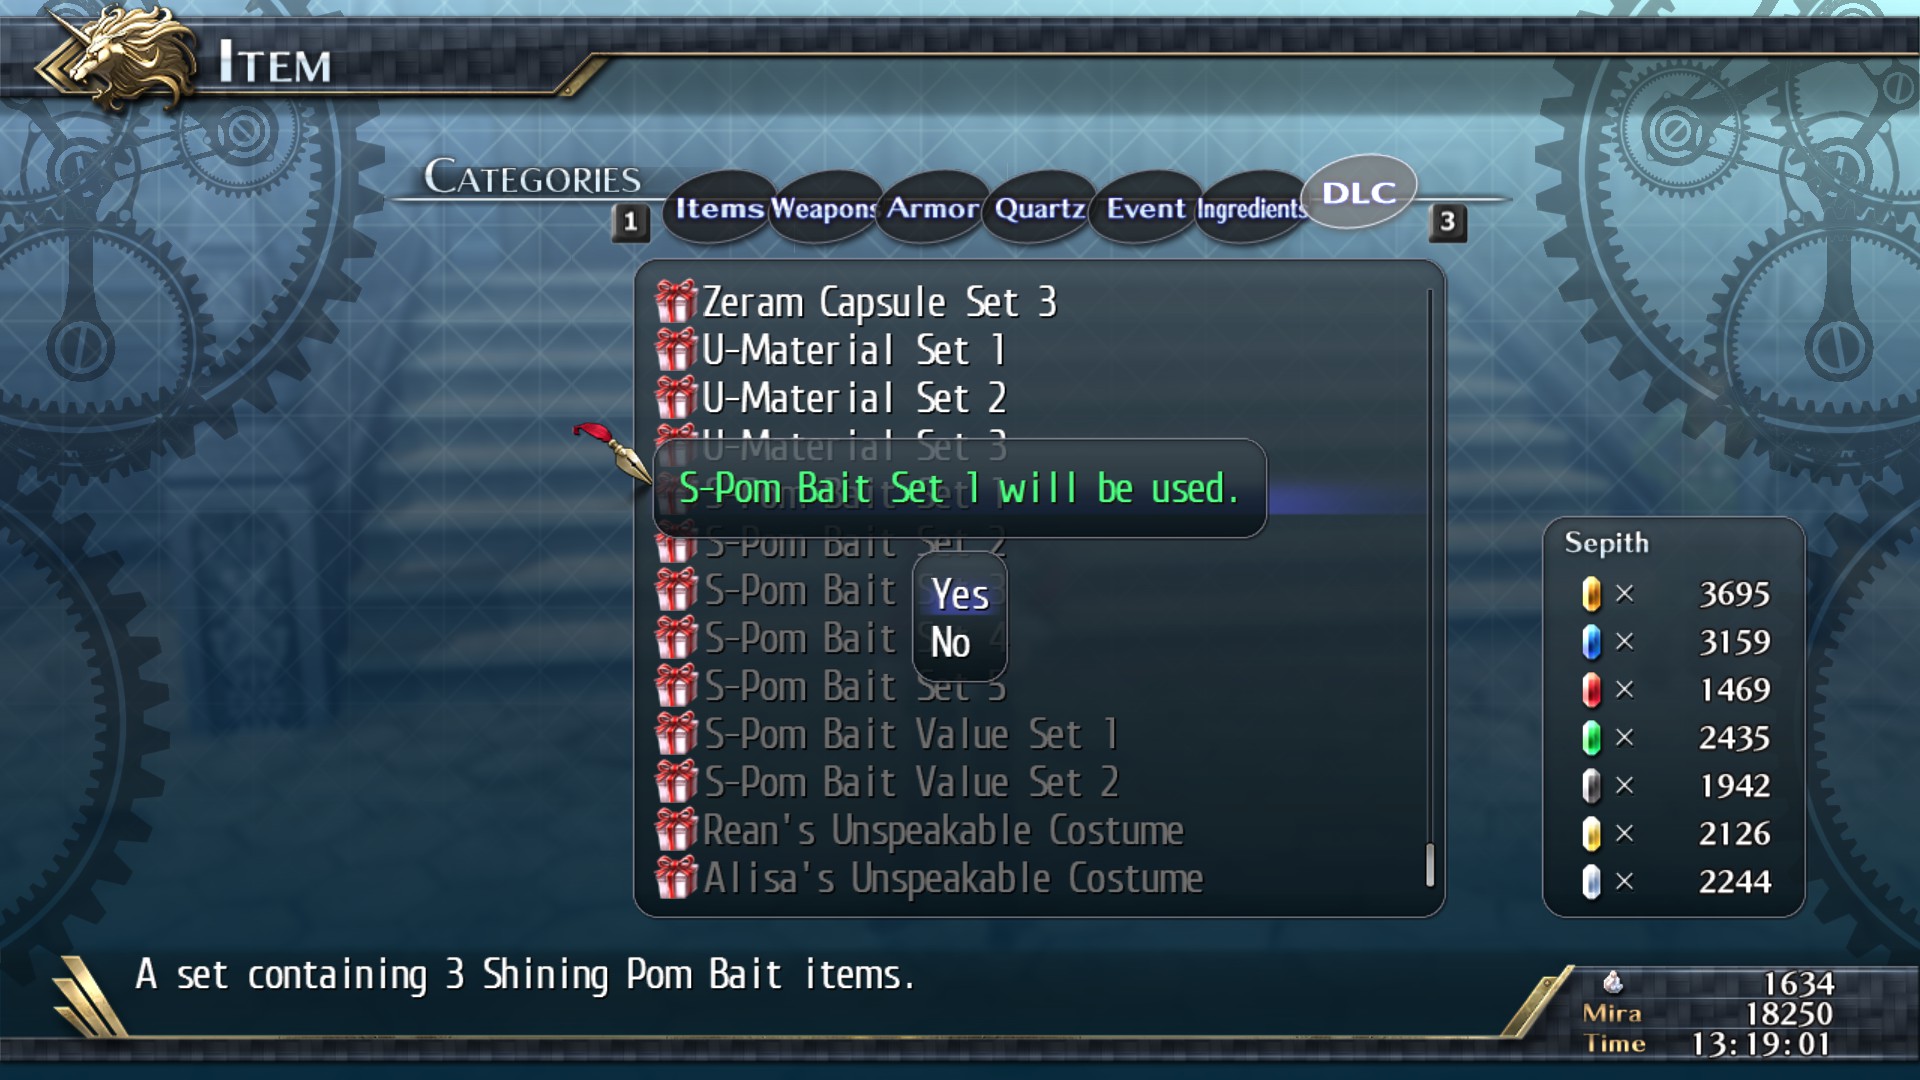 The Legend of Heroes: Trails of Cold Steel II - Shining Pom Bait Set 1 Featured Screenshot #1